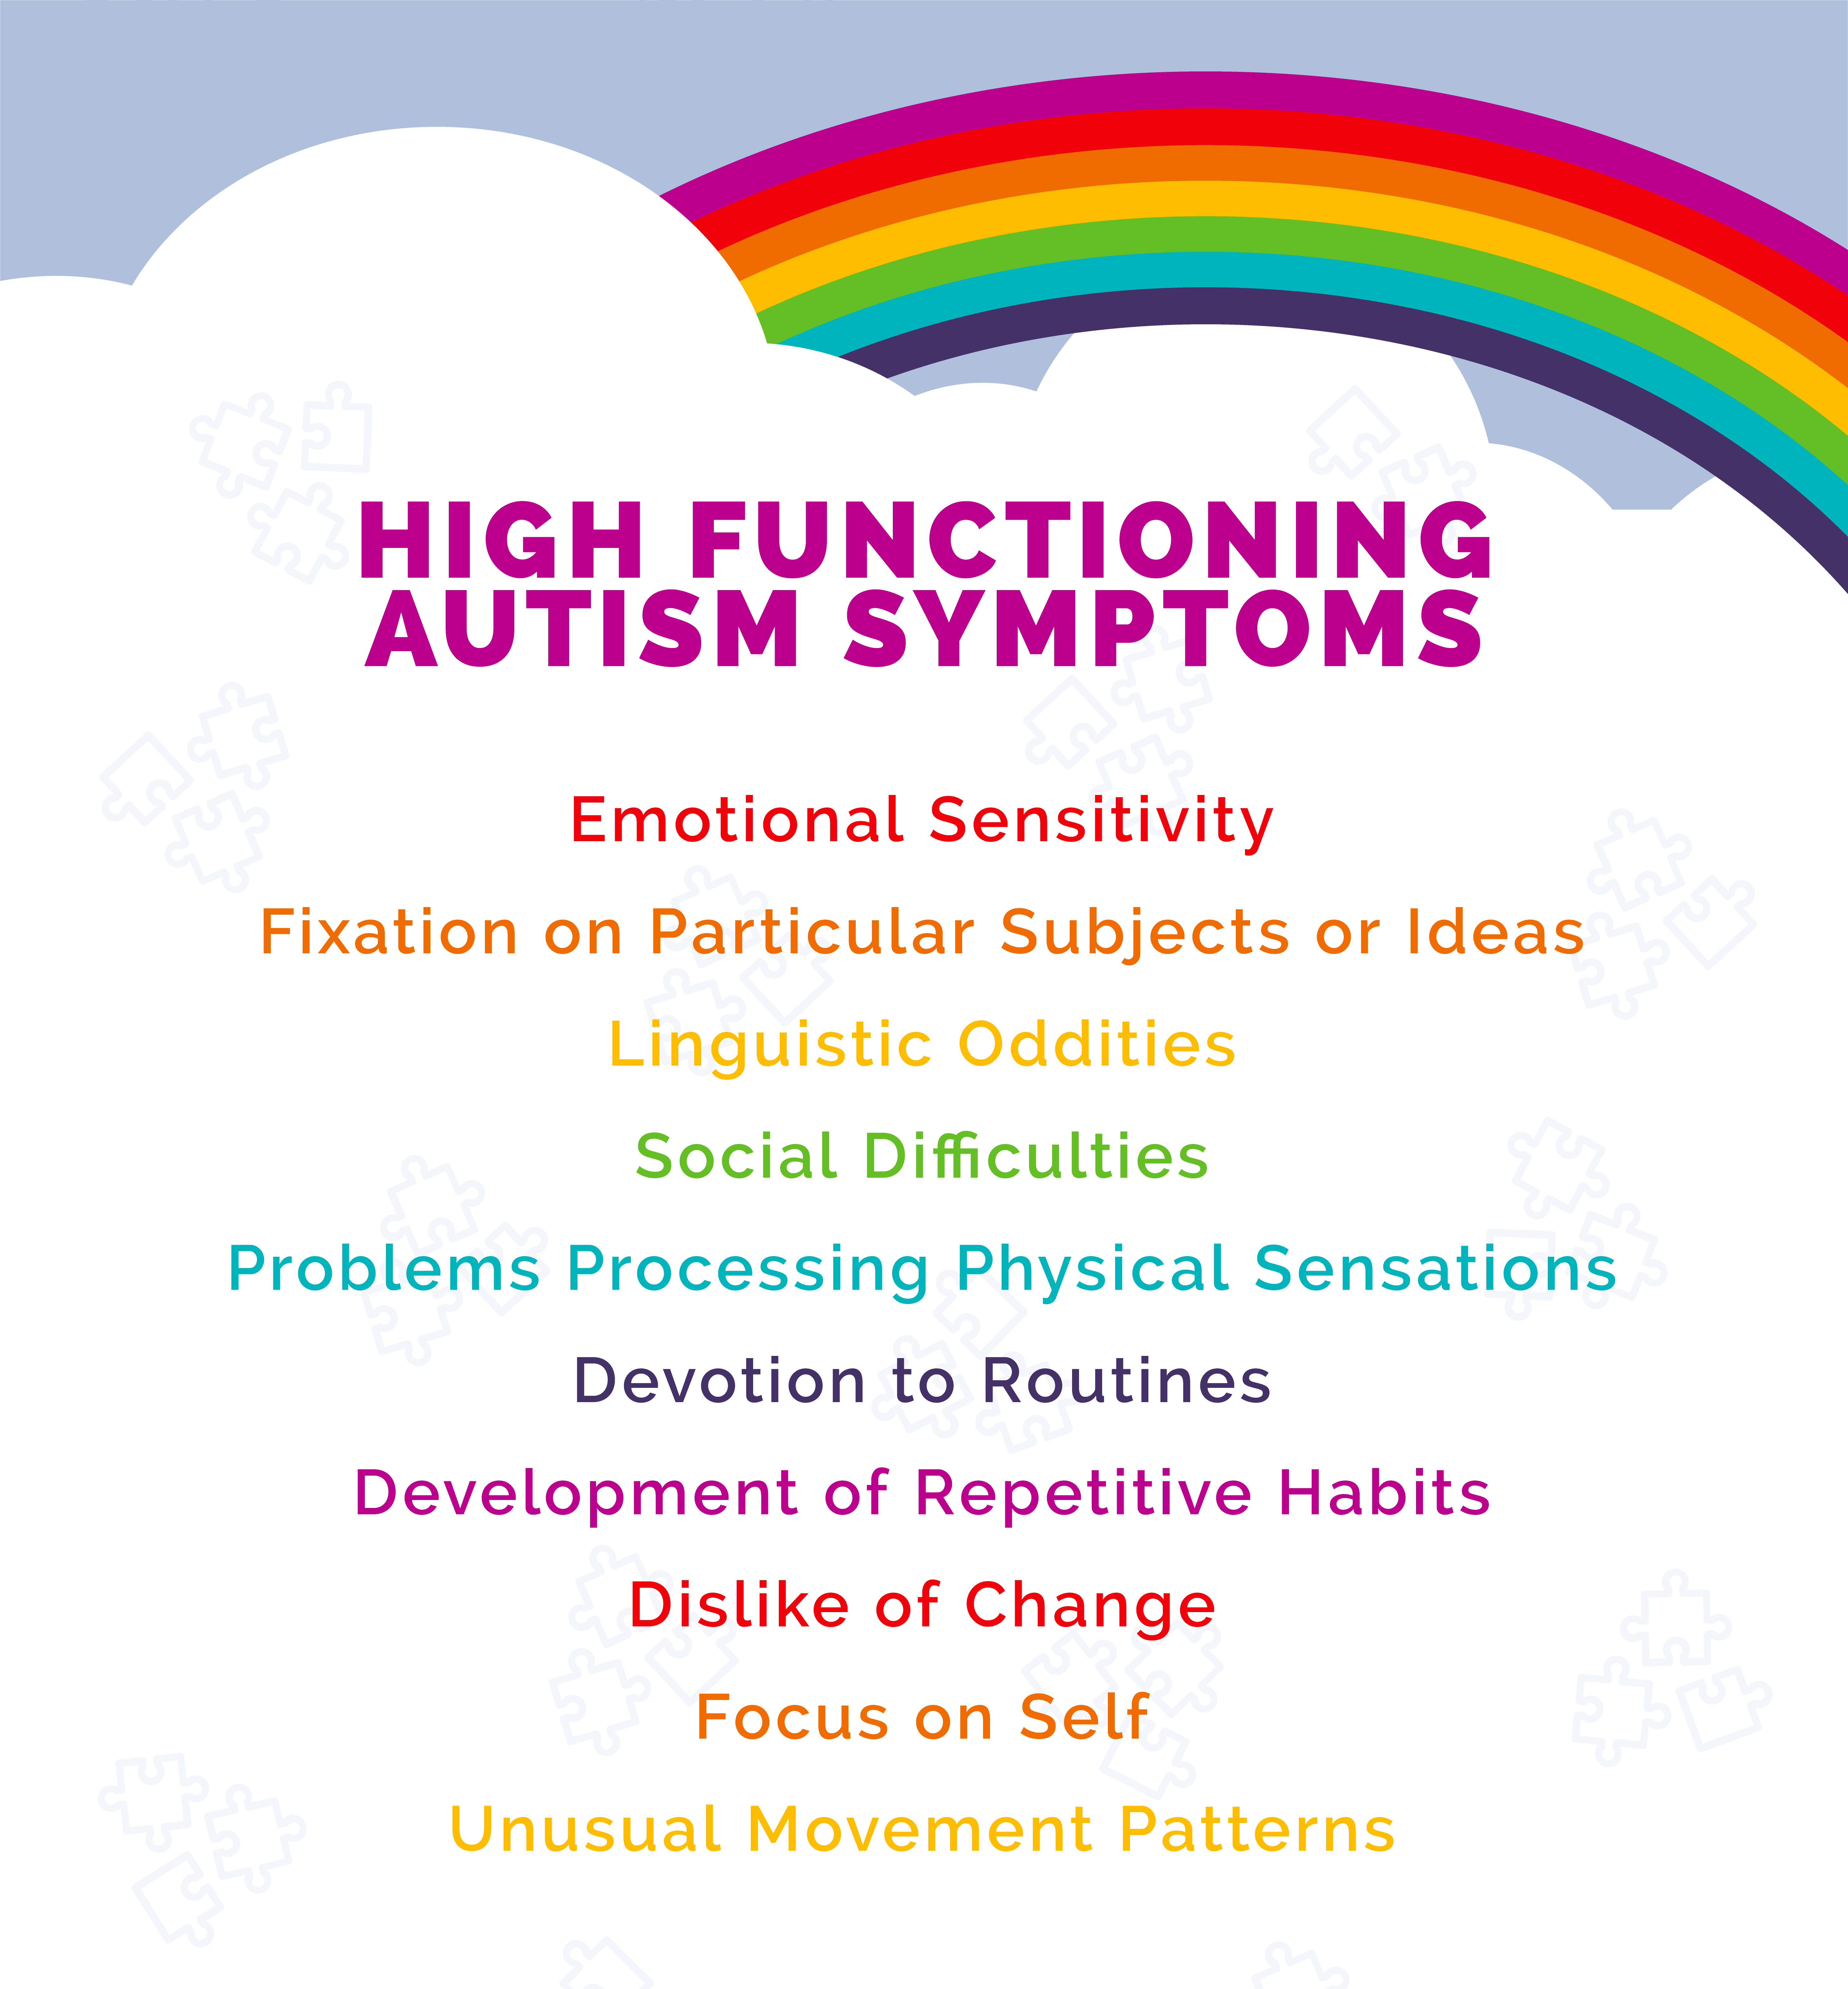 What is the highly intelligent form of autism?